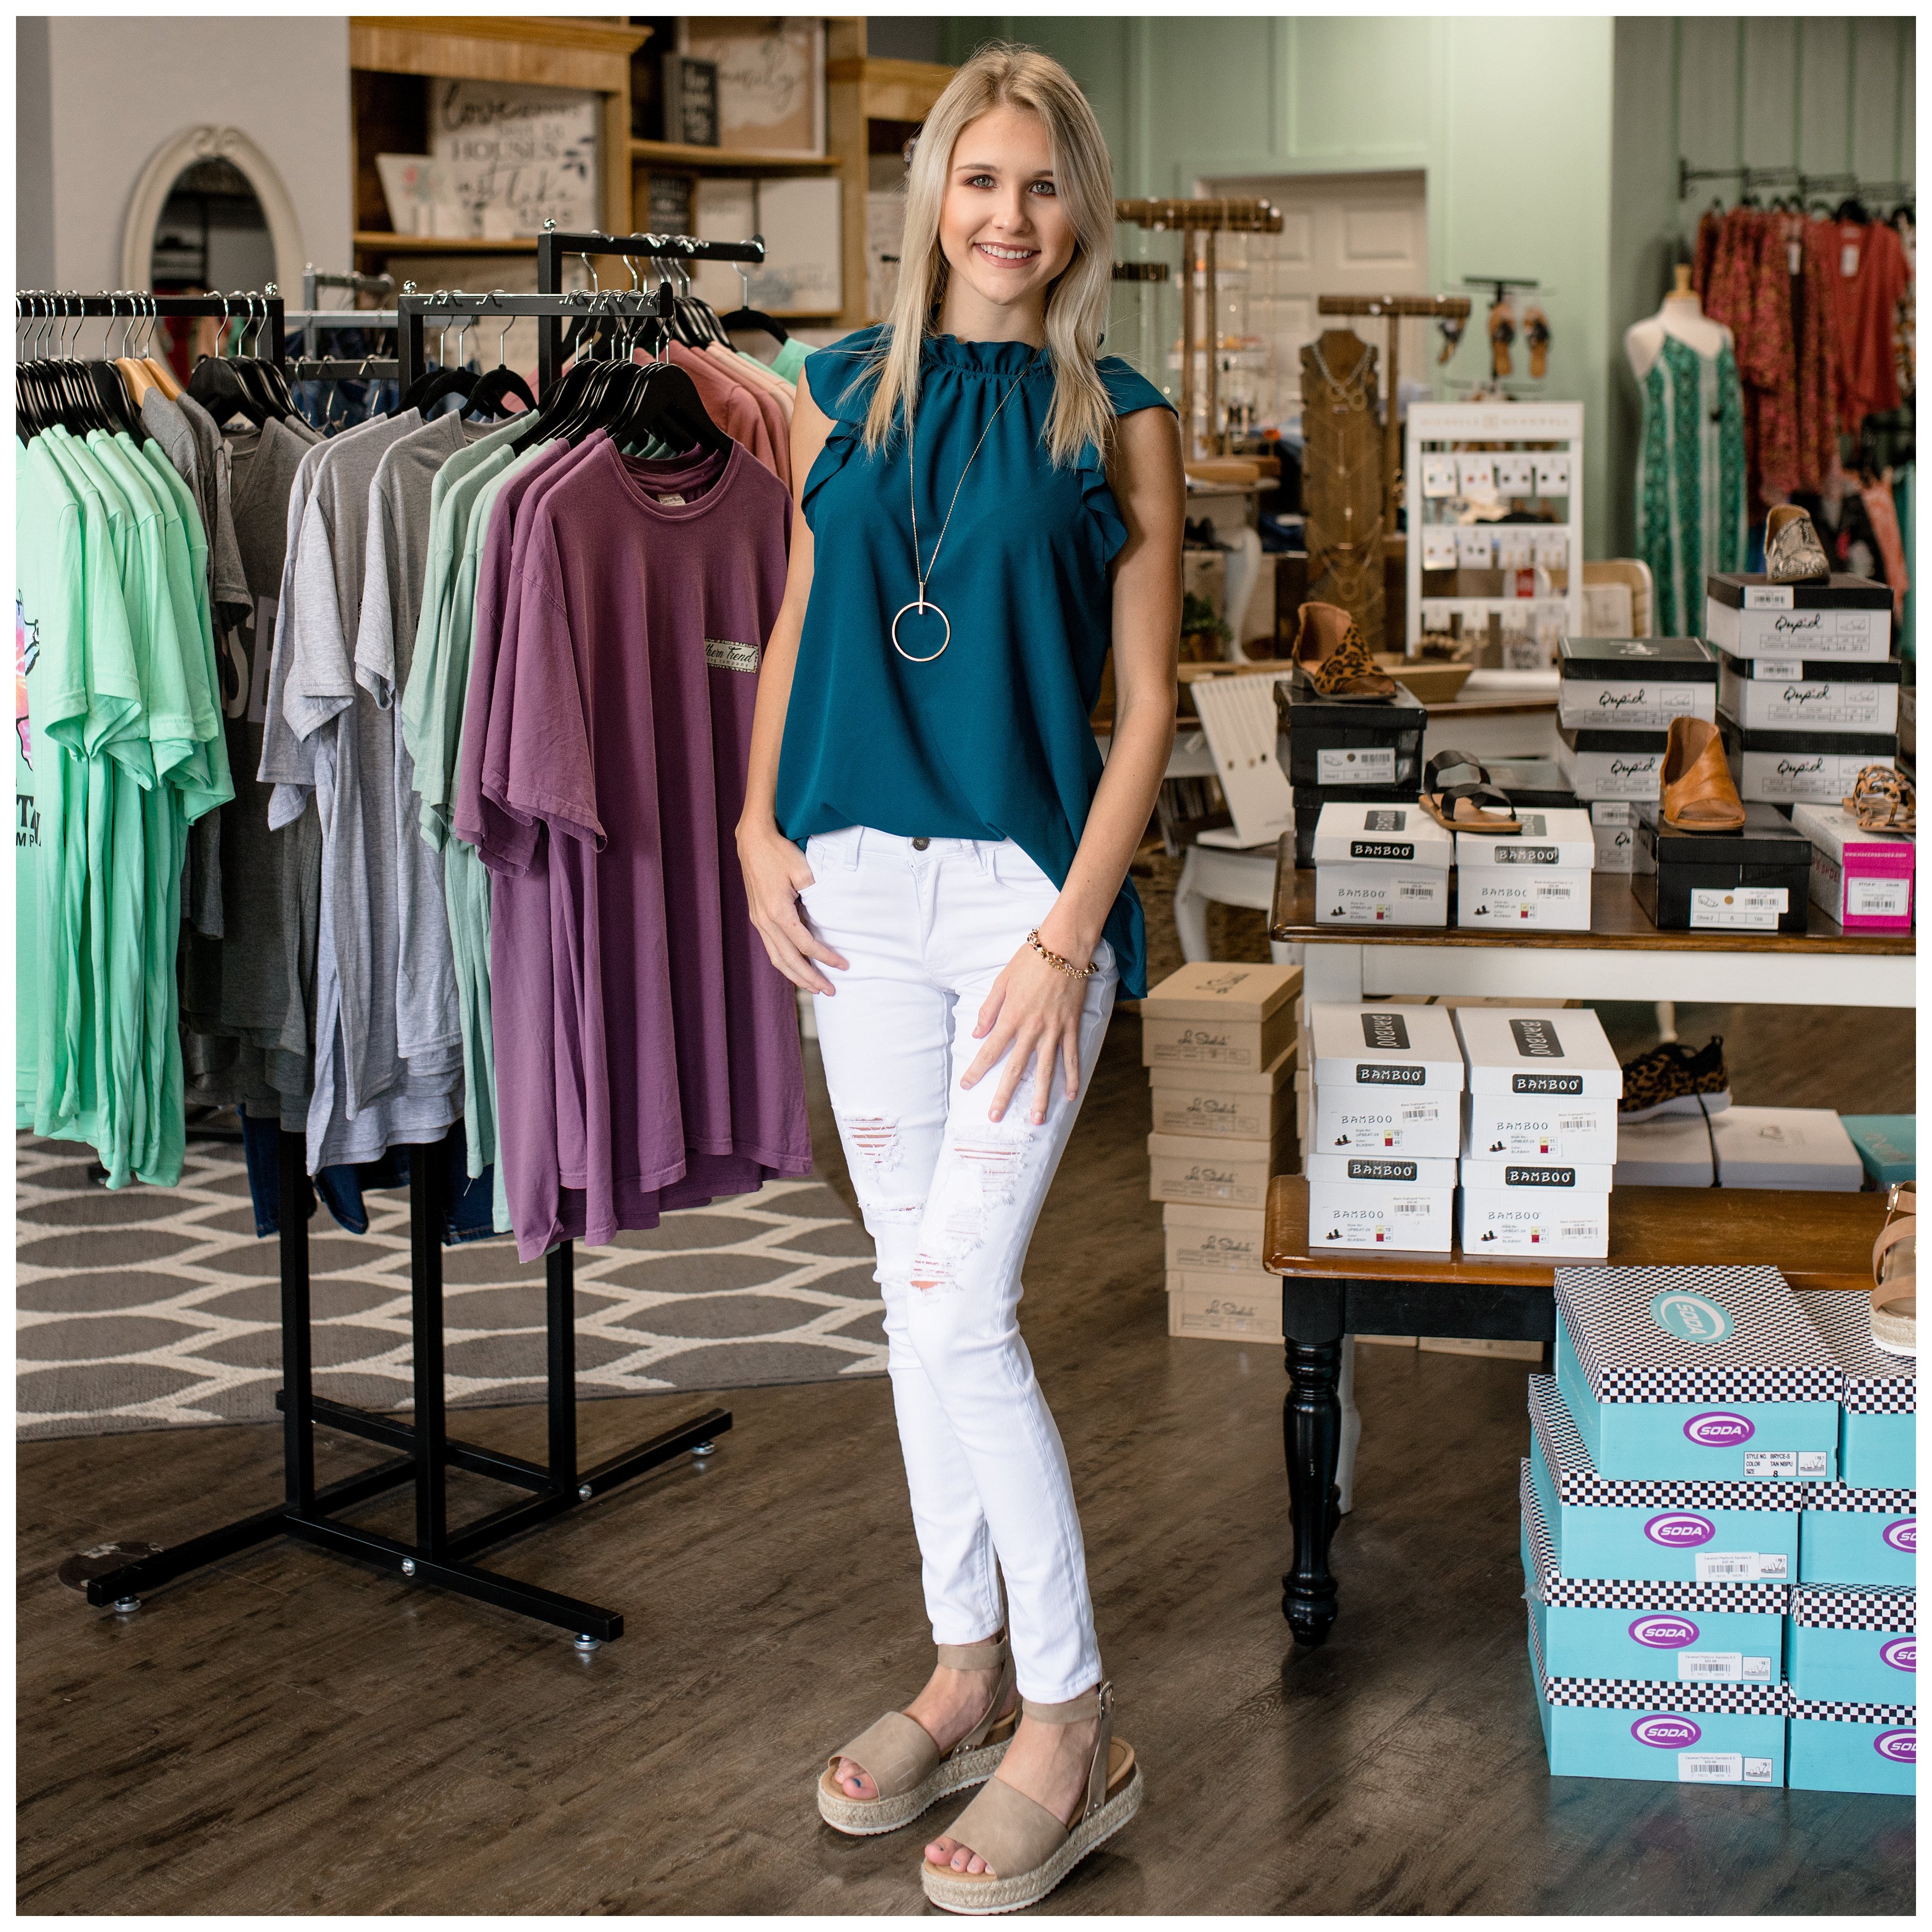 Lake City boutique with stylish clothing for women, Southern Sisters boutique